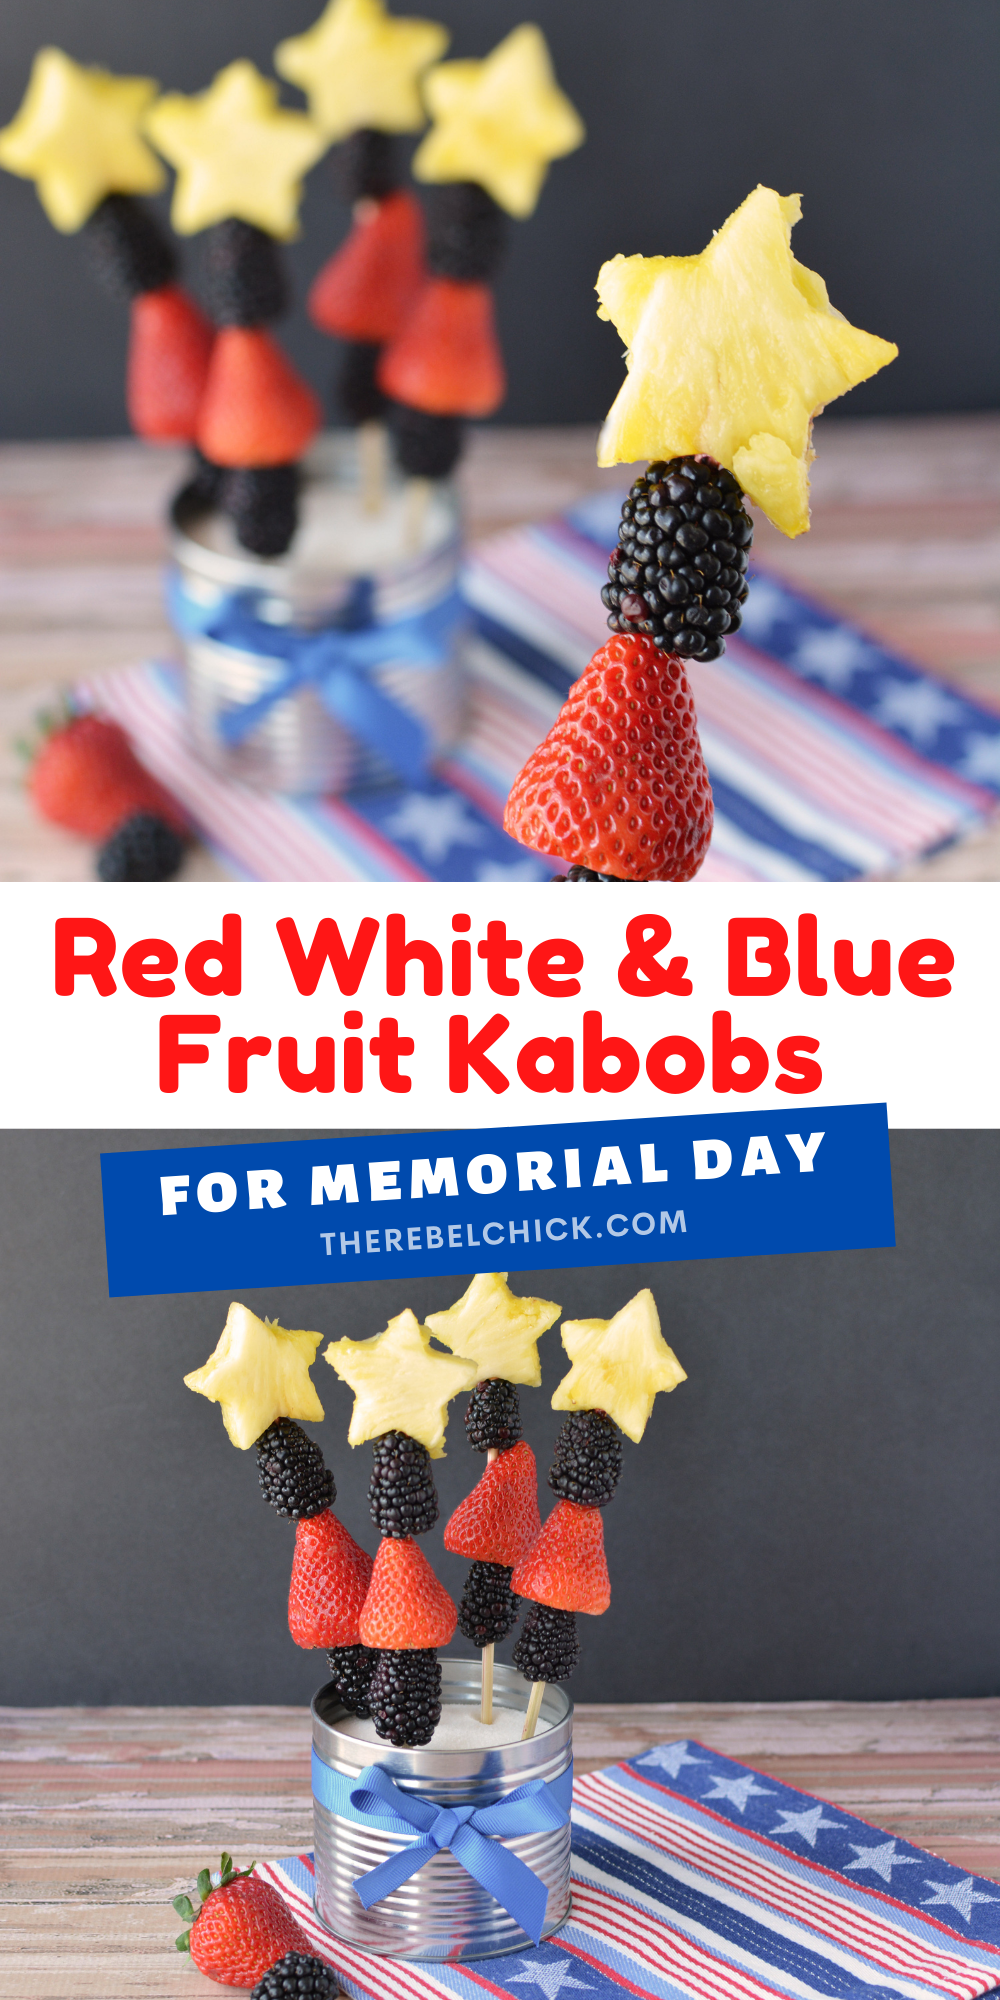 Red White & Blue Patriotic Fruit Kabobs Recipe for Memorial Day and 4th of July